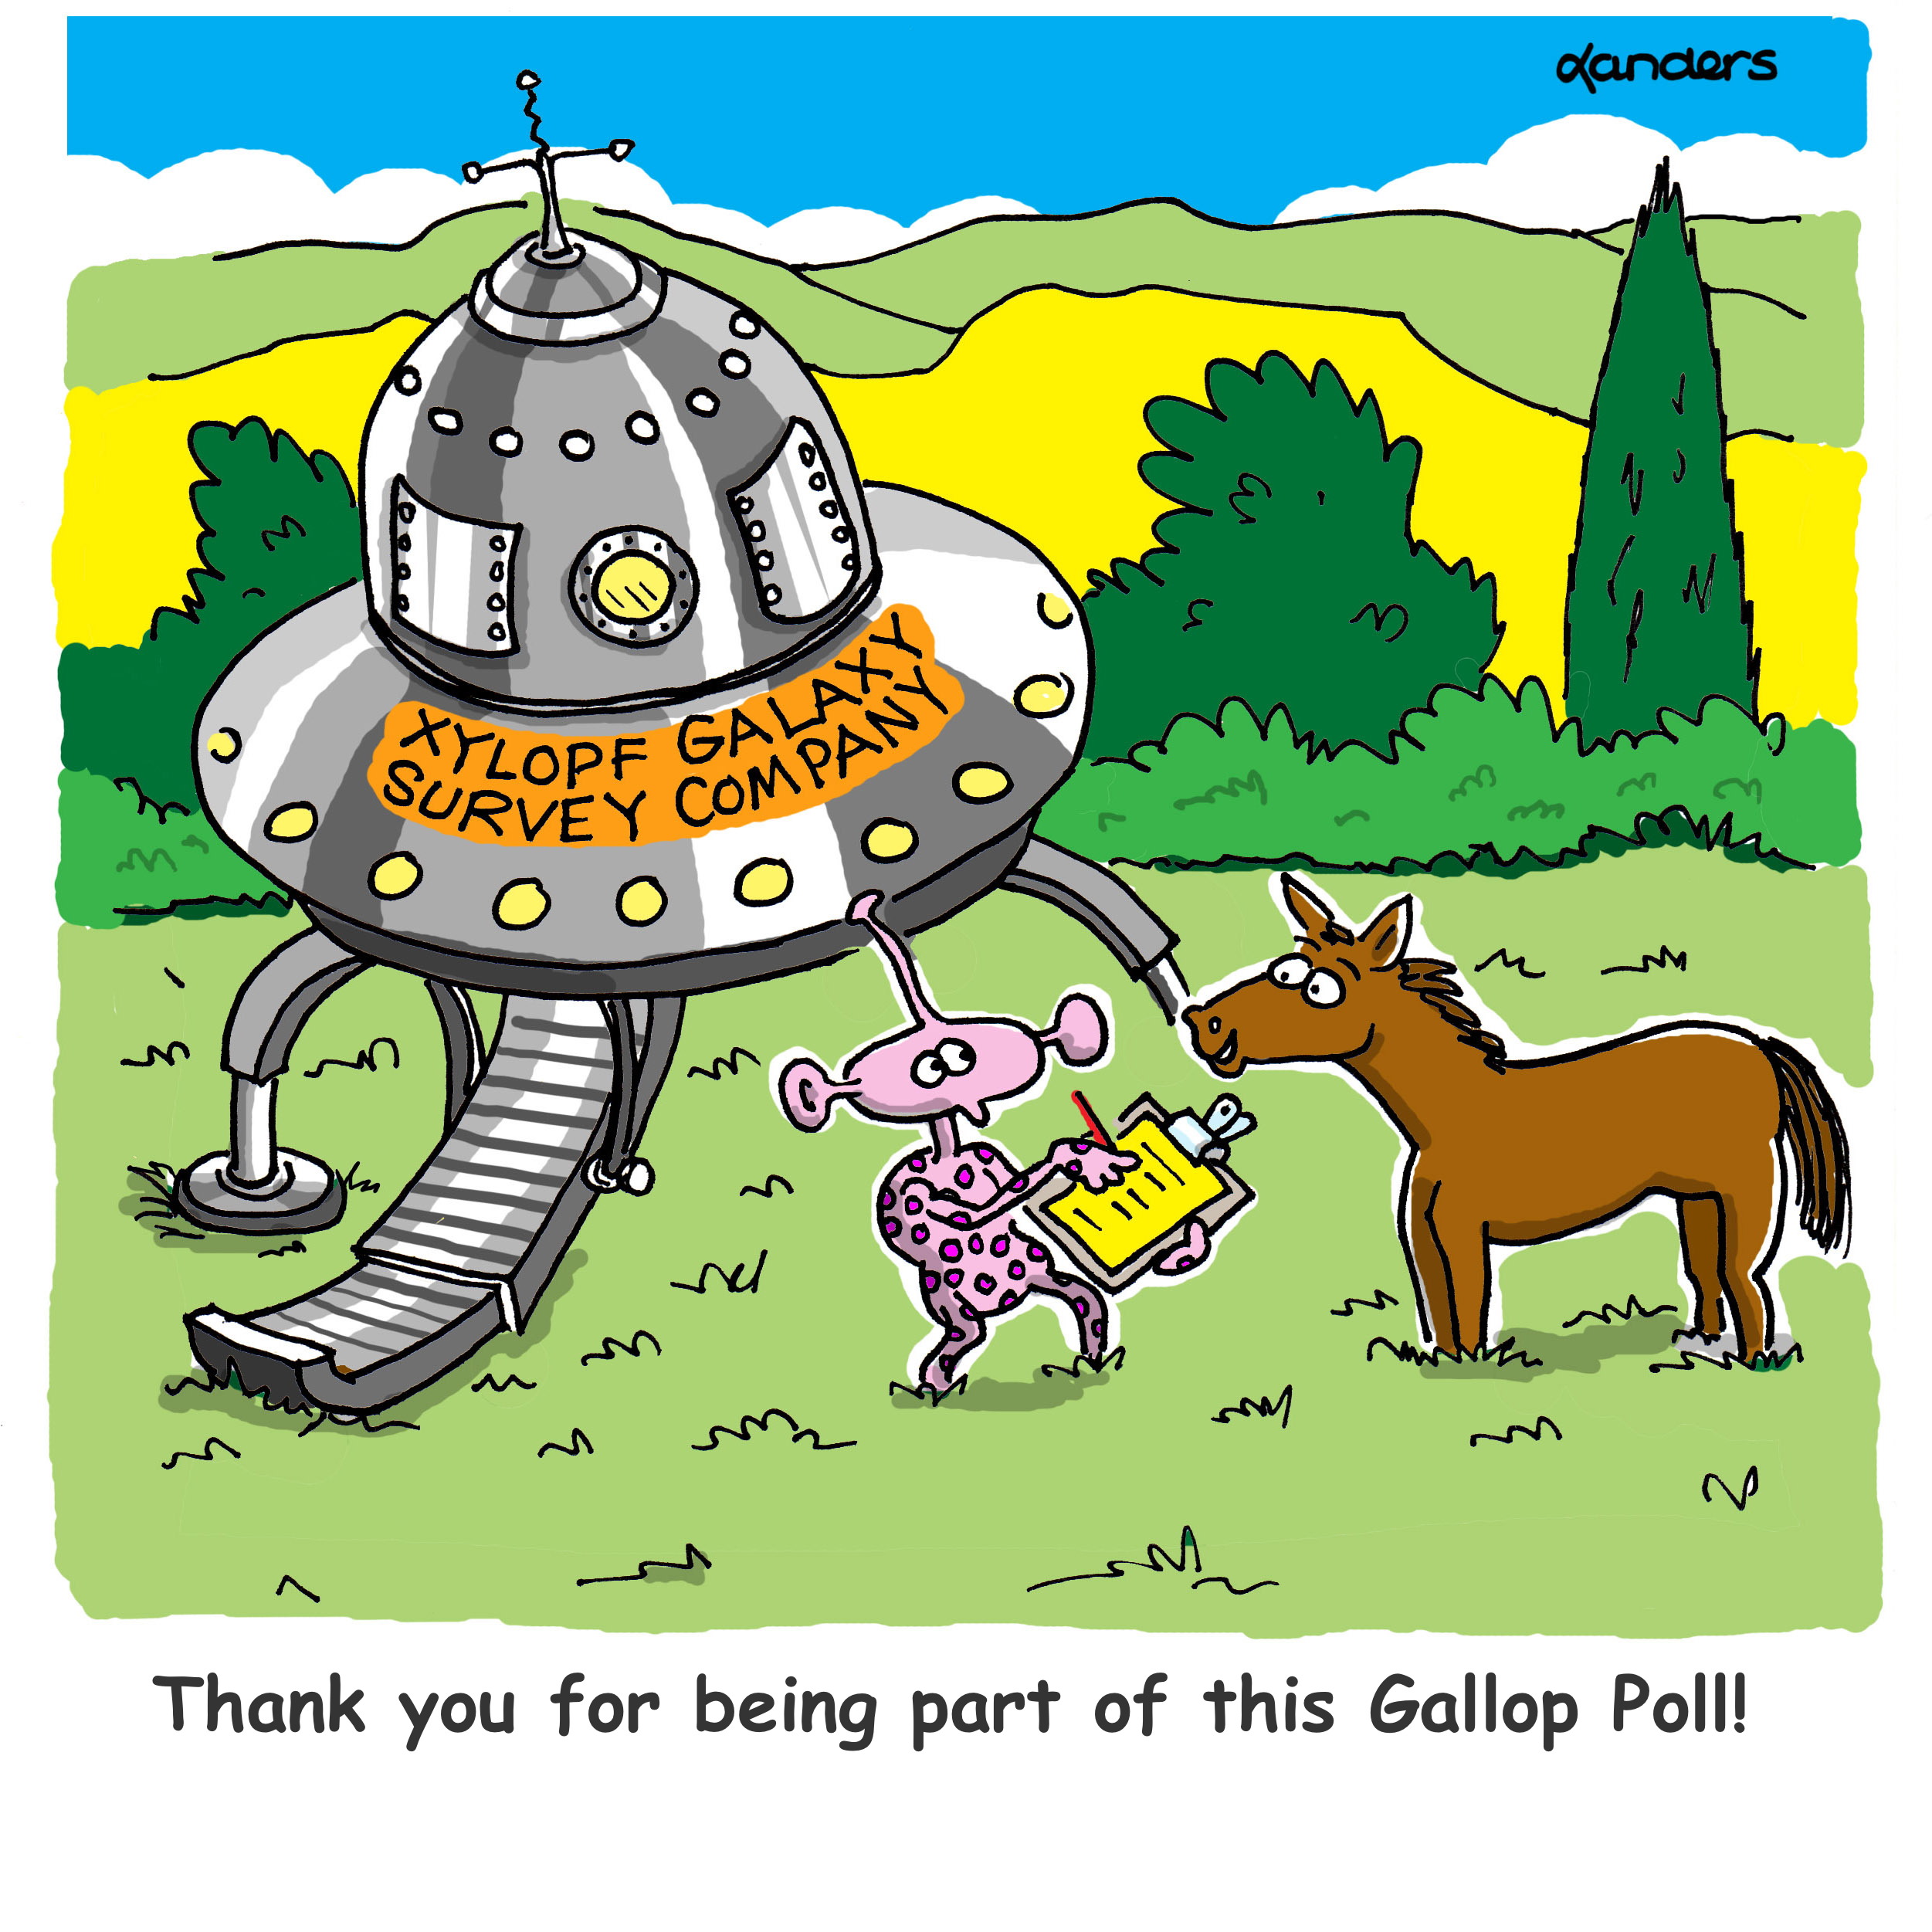 a cartoon showing an alien from the "xylopf survey company" interviewing a horse